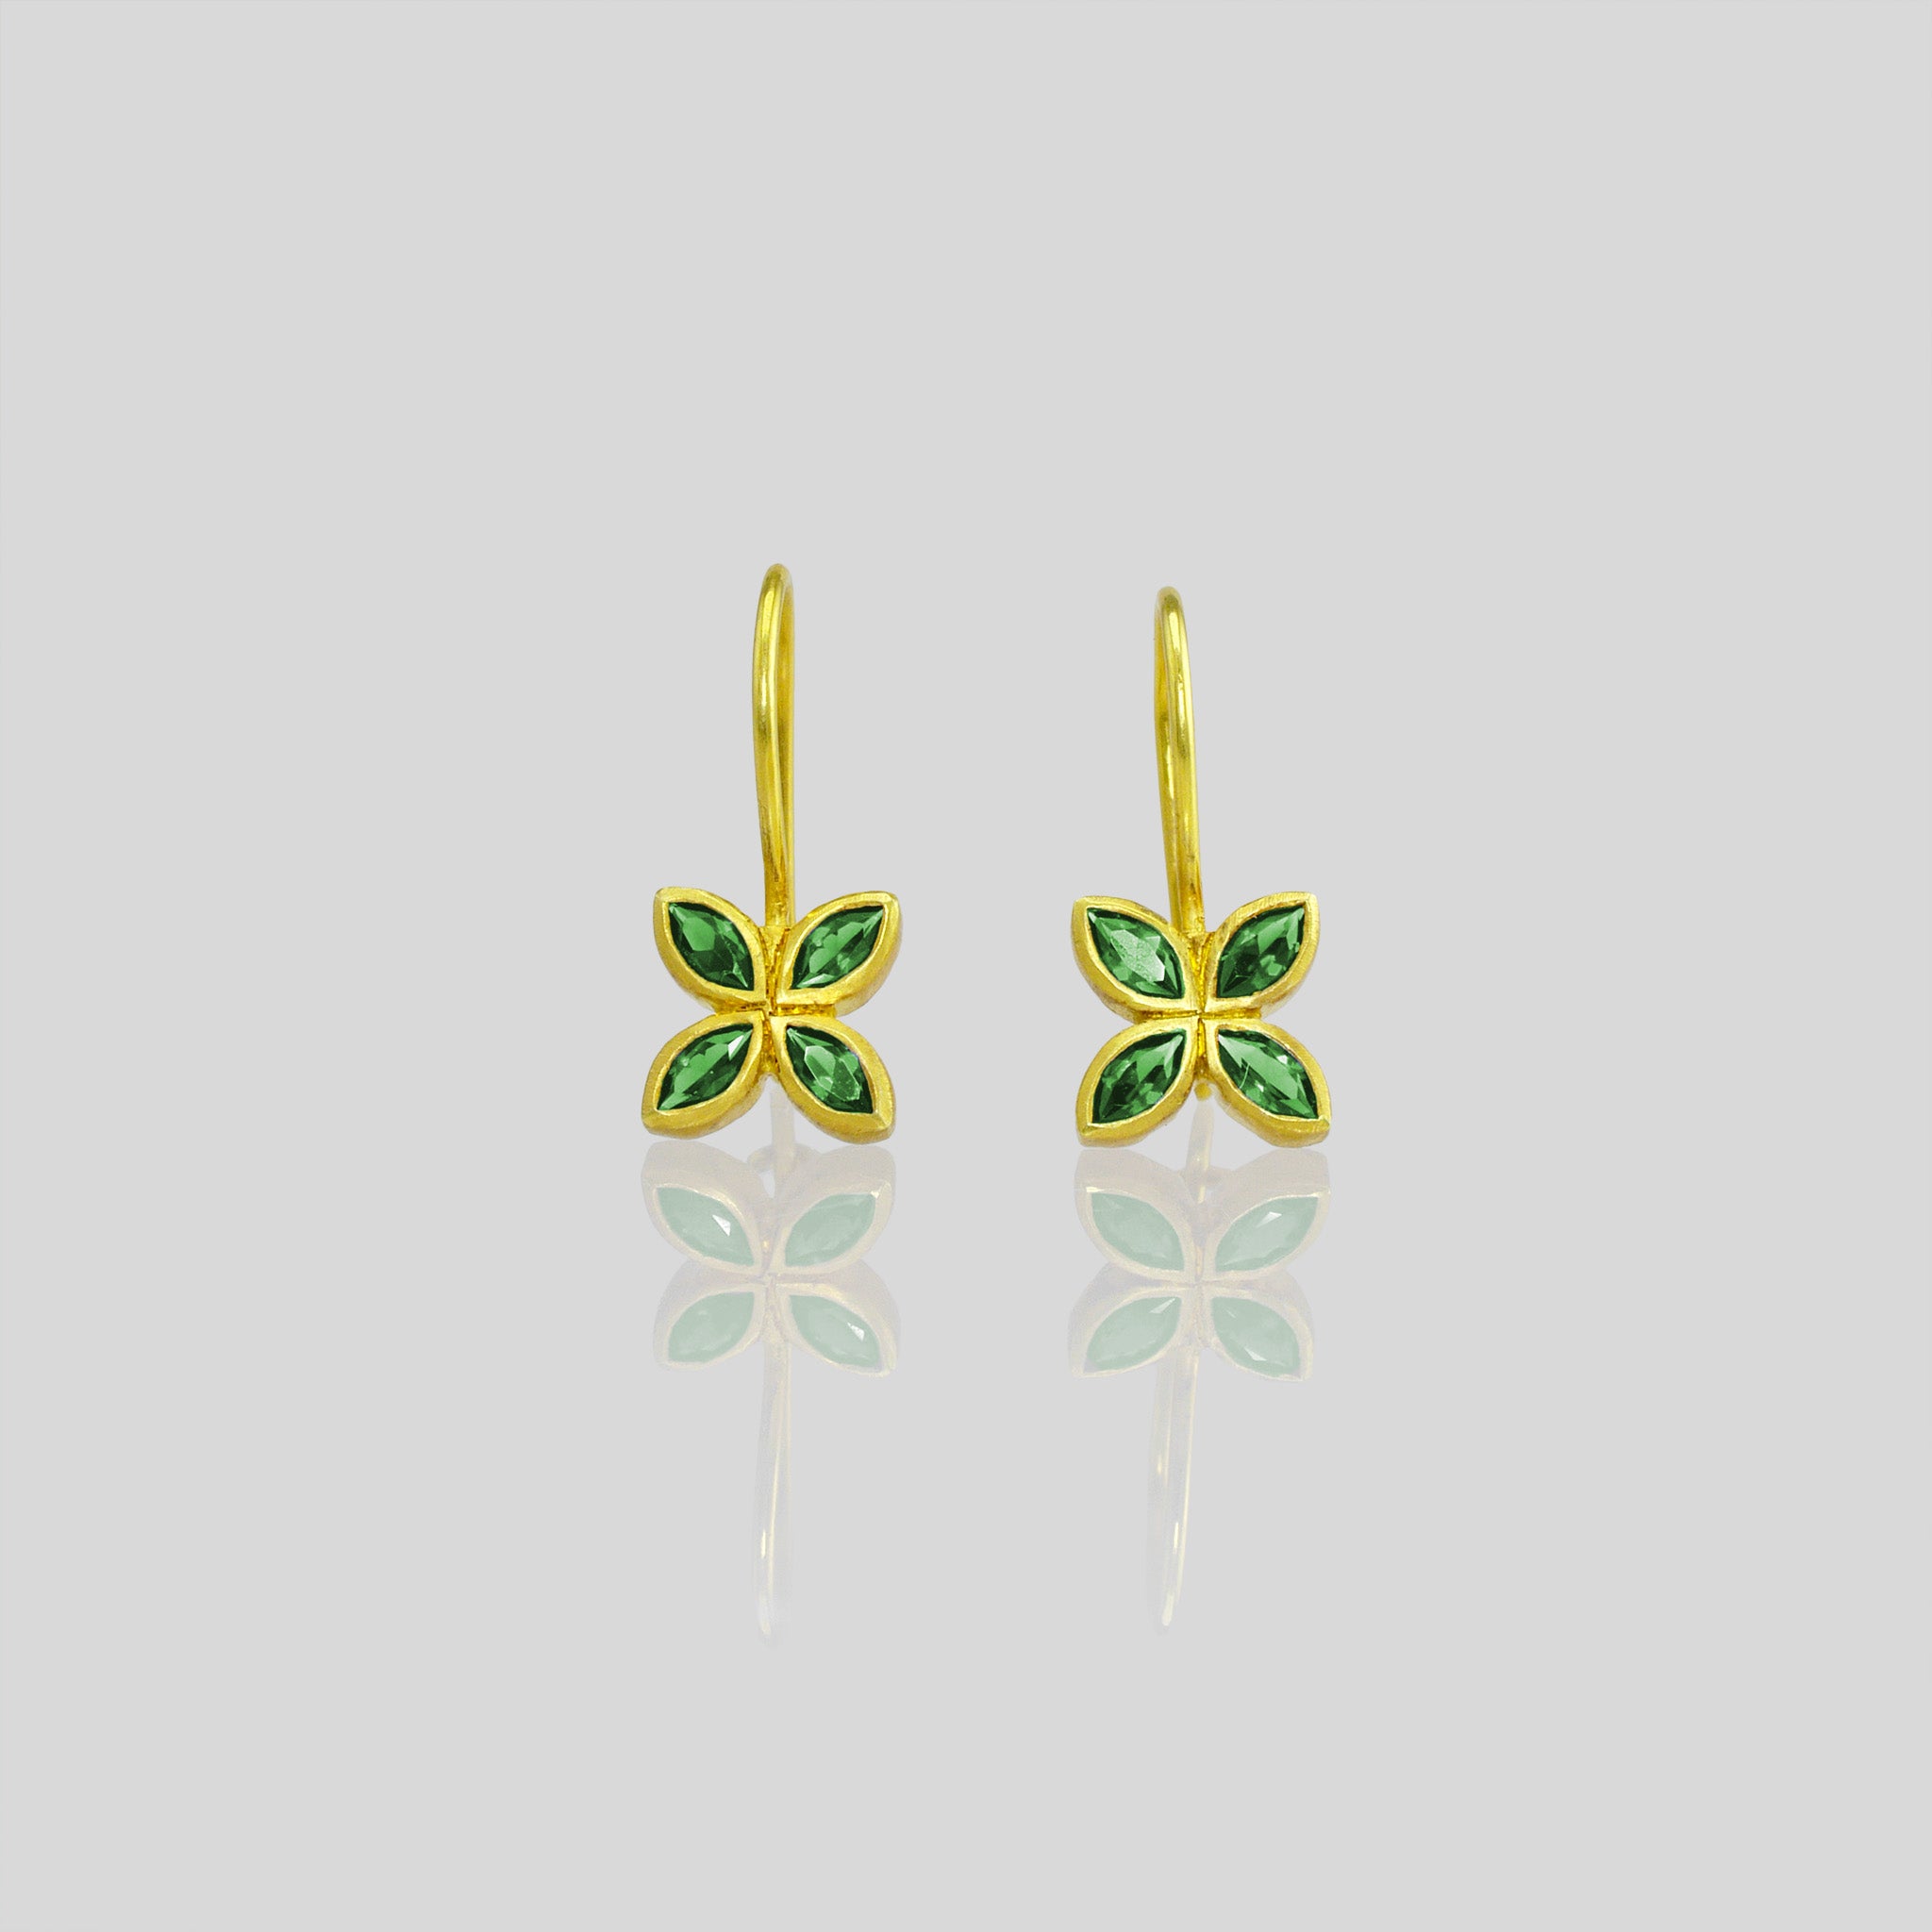 Close up of Dazzling Emerald flower earrings, crafted from 4 marquise gemstones. Lightweight, colorful and vibrant.